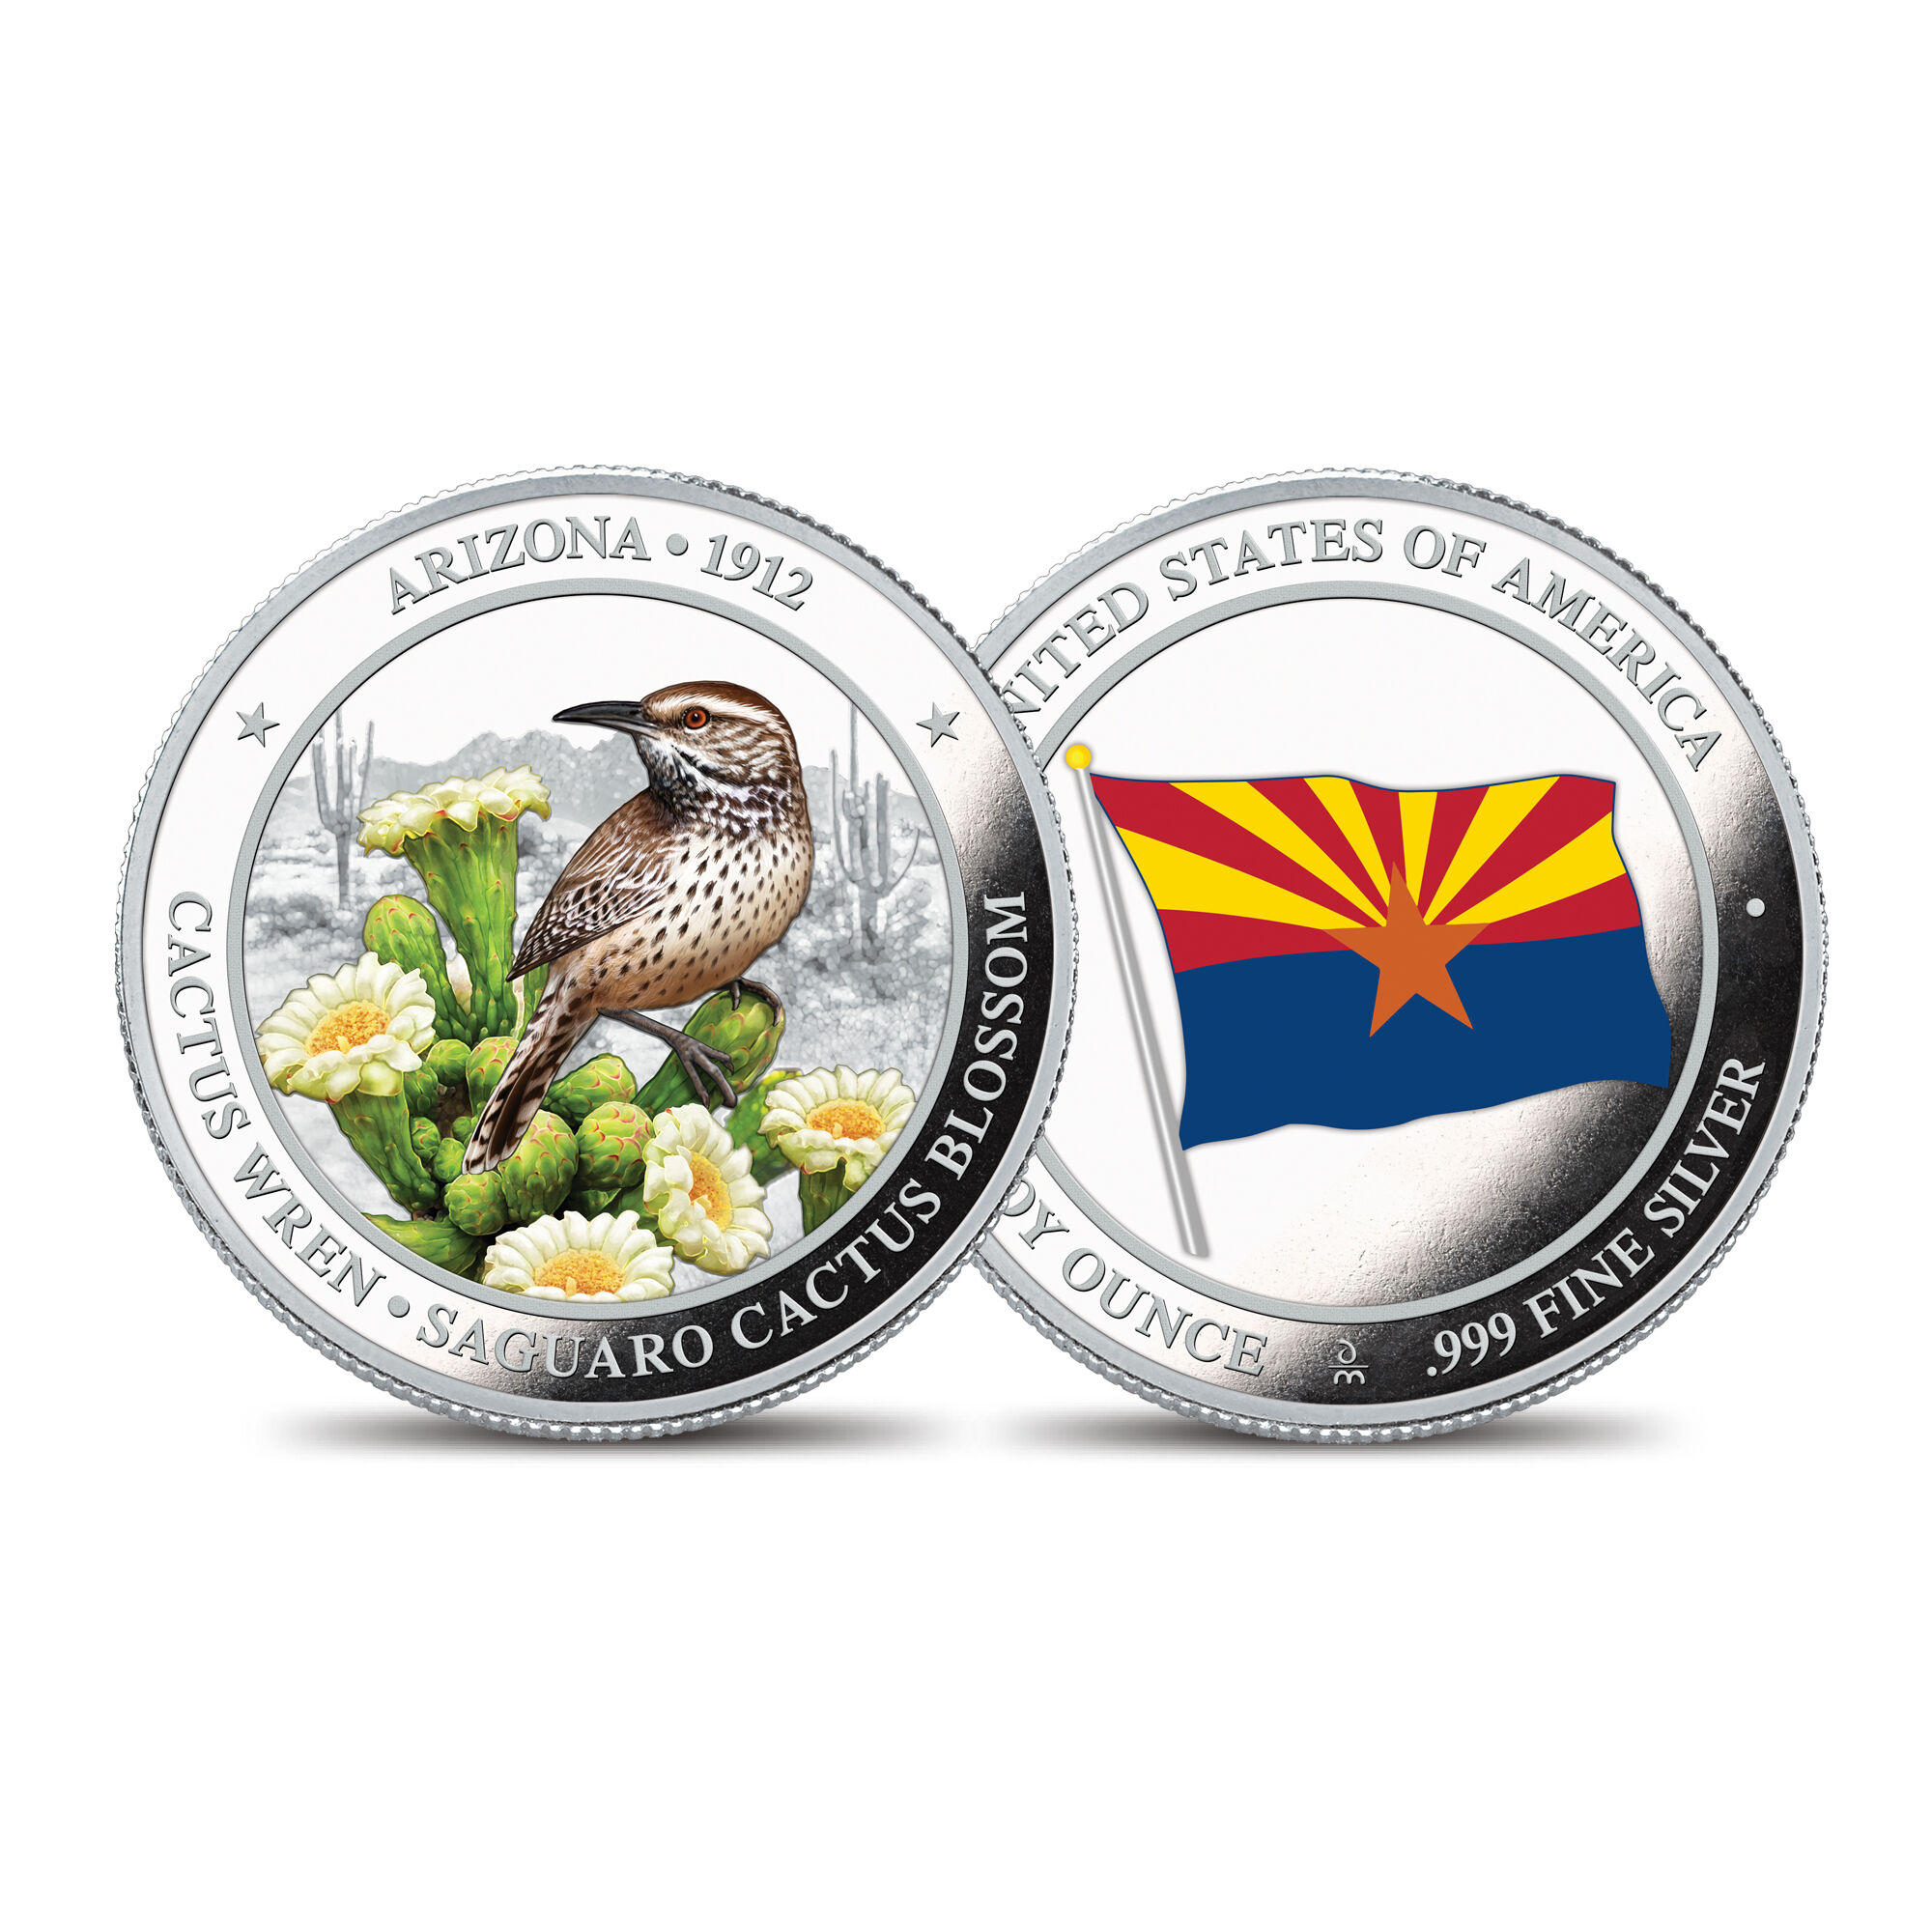 The State Bird and Flower Silver Commemoratives 2167 0088 a commemorativeAZ